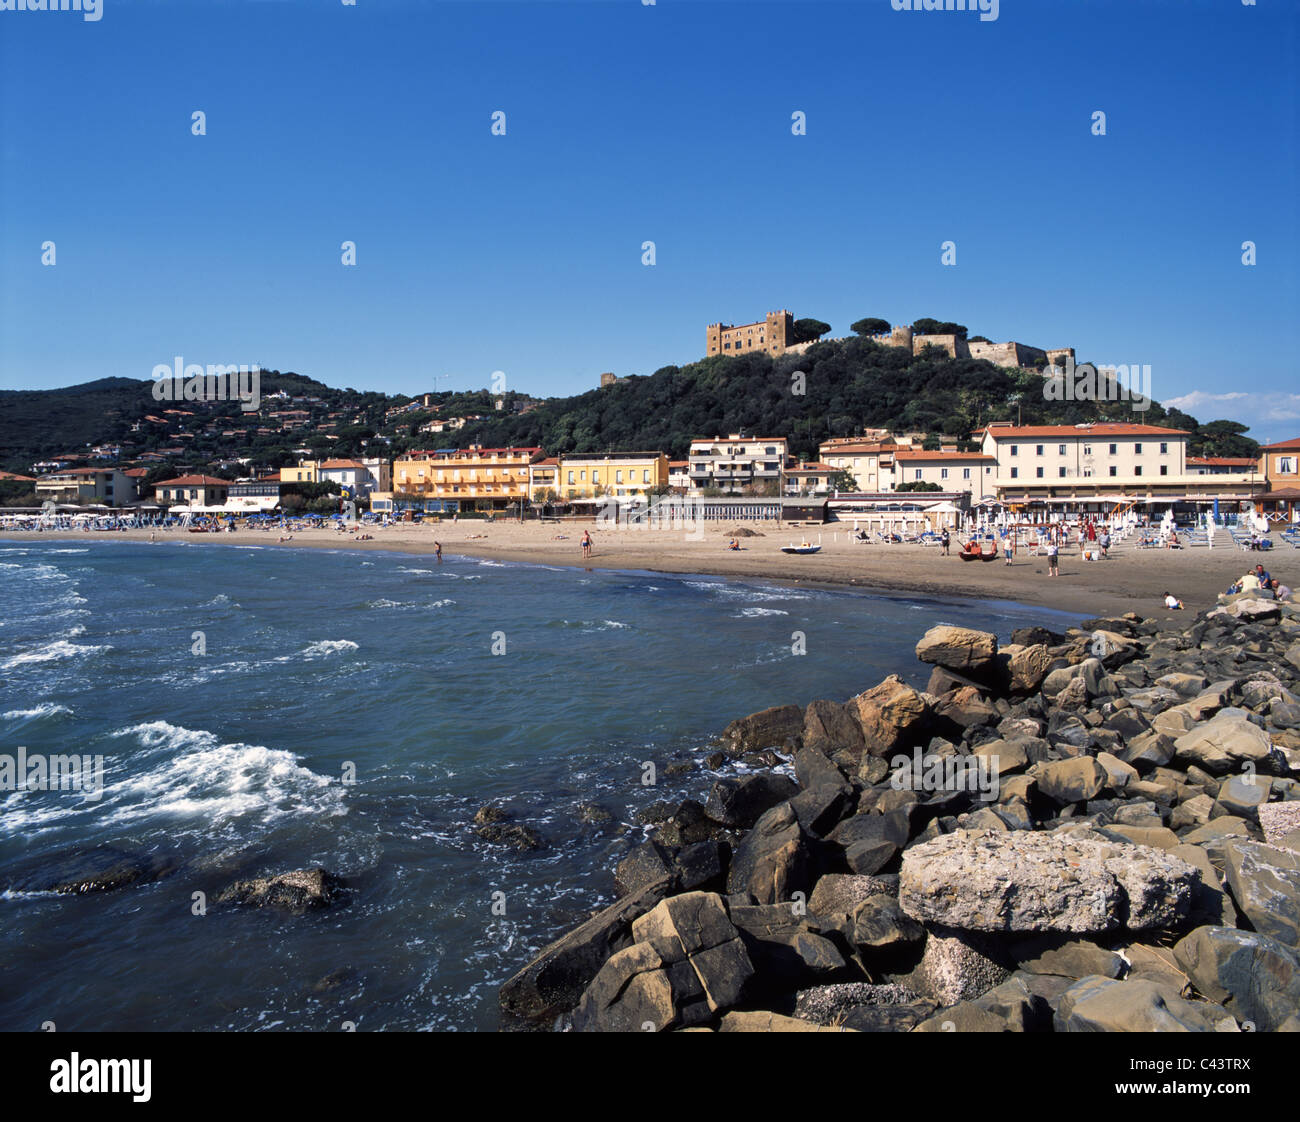 View of Castiglione della Pescaia with the medieval fortress and the seafront, Tuscany, Italy Stock Photo